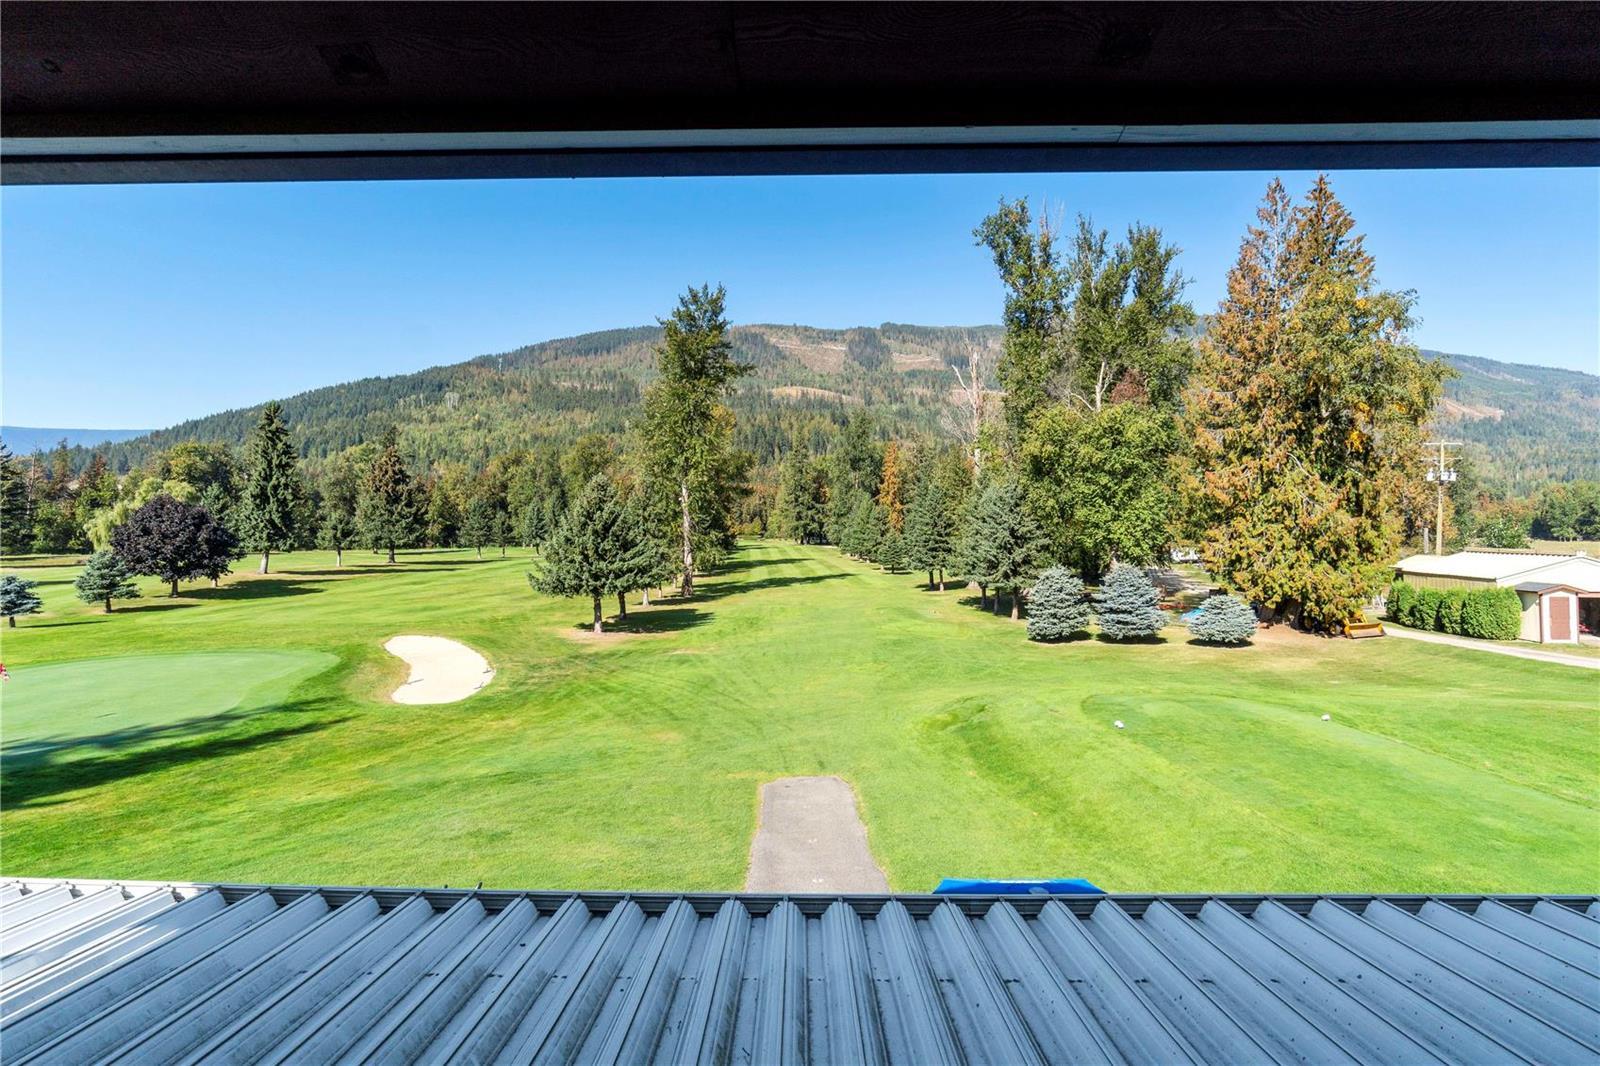  1450 Husky Frontage Road, Sicamous